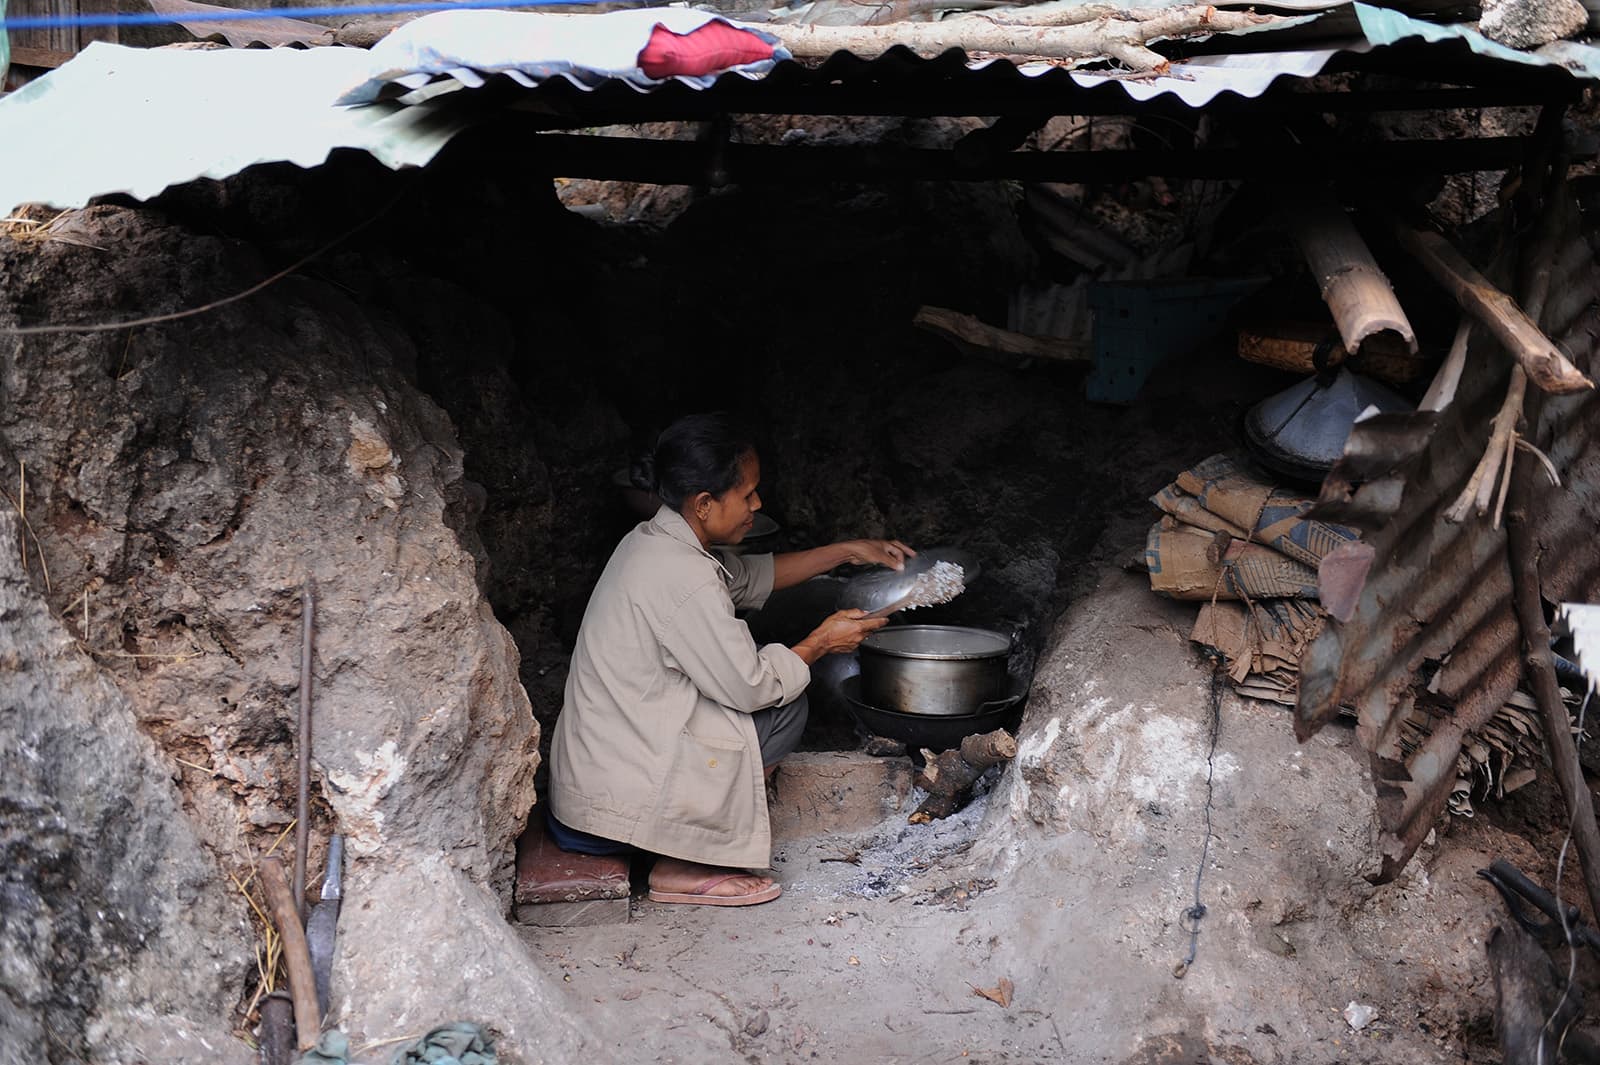 Woman cooks over a fire in a below ground kitchen.